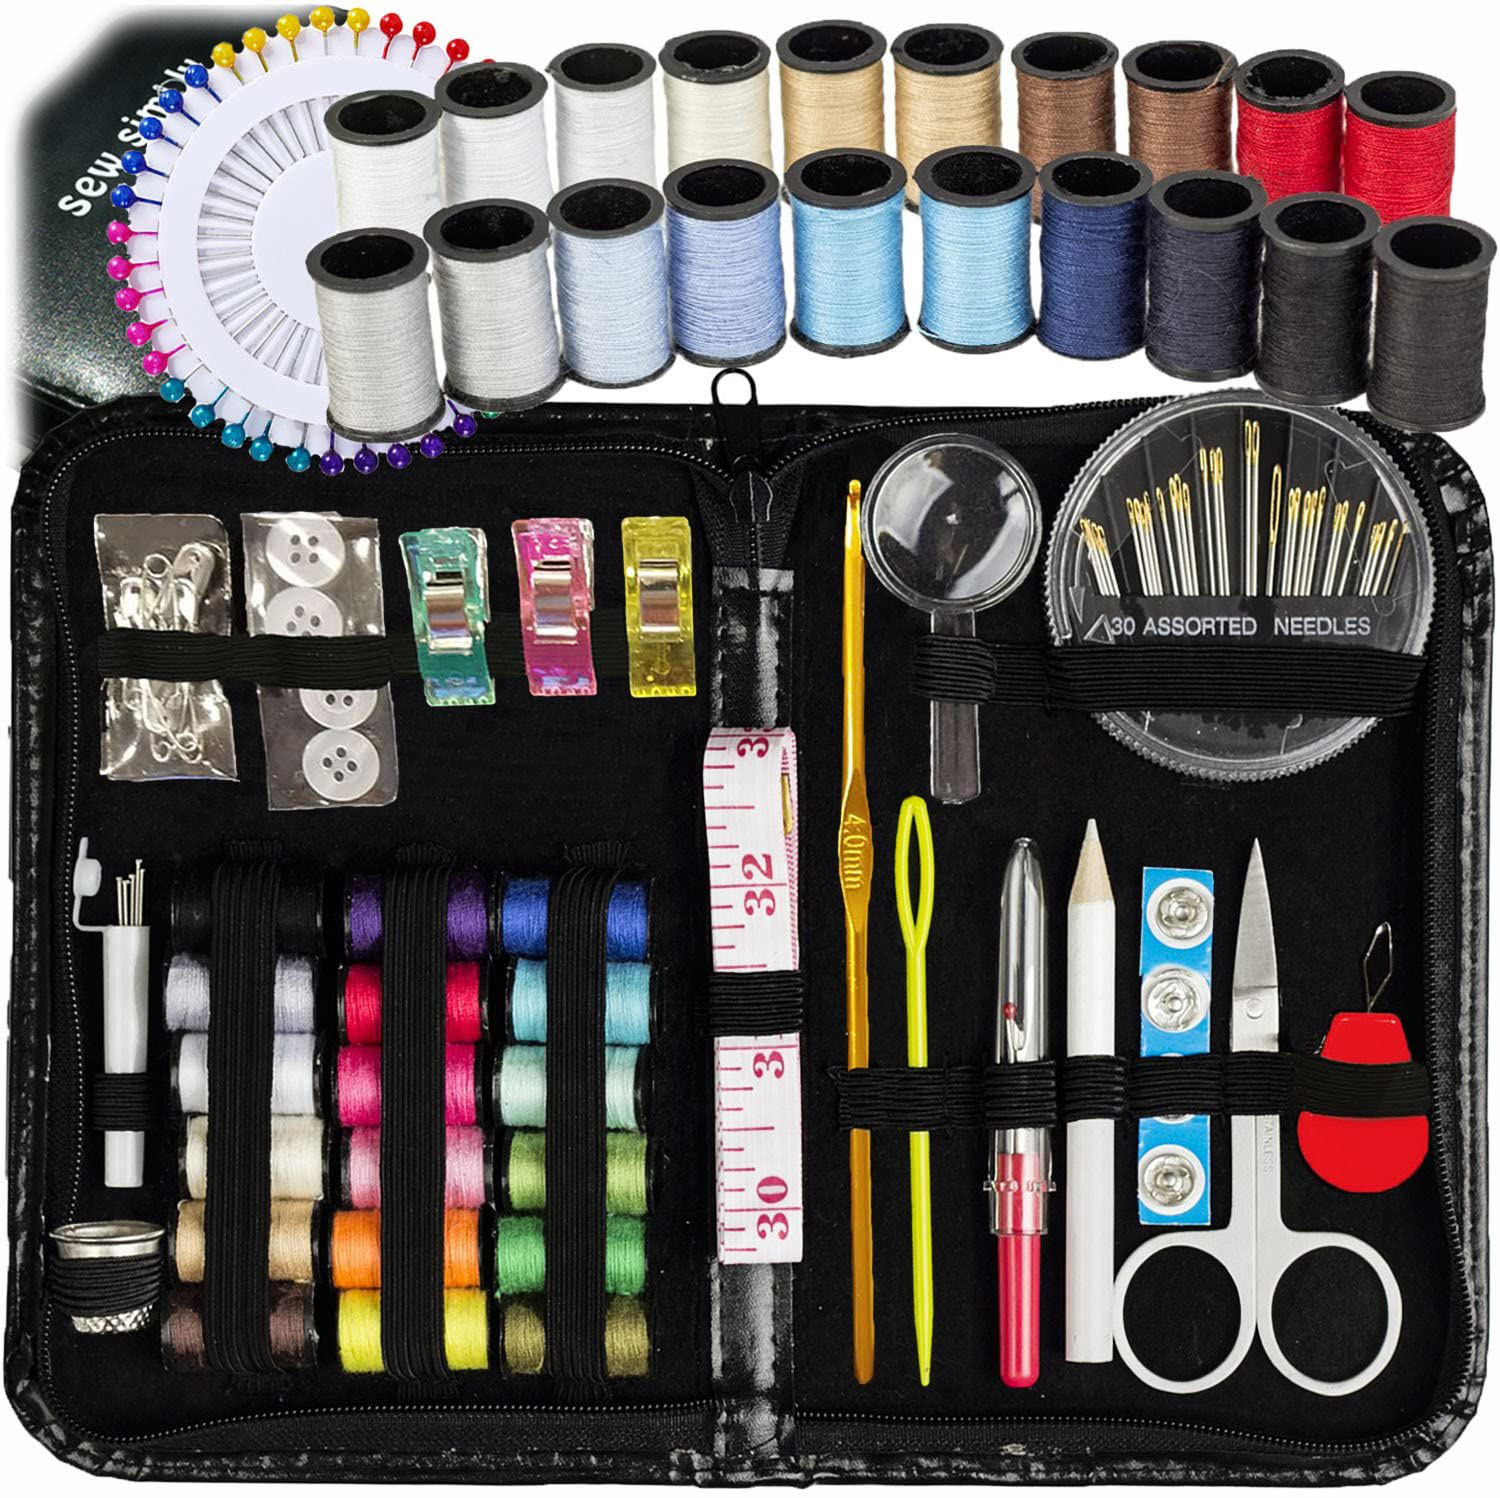 ARTIKA Sewing kit & Crochet kit, DIY Over 100 Premium Sewing and Crocheting Supplies, Free Extra Knitting Accessories - Travel Sewing kit, for Beginners, Emergency, Kids, Summer Campers and Home